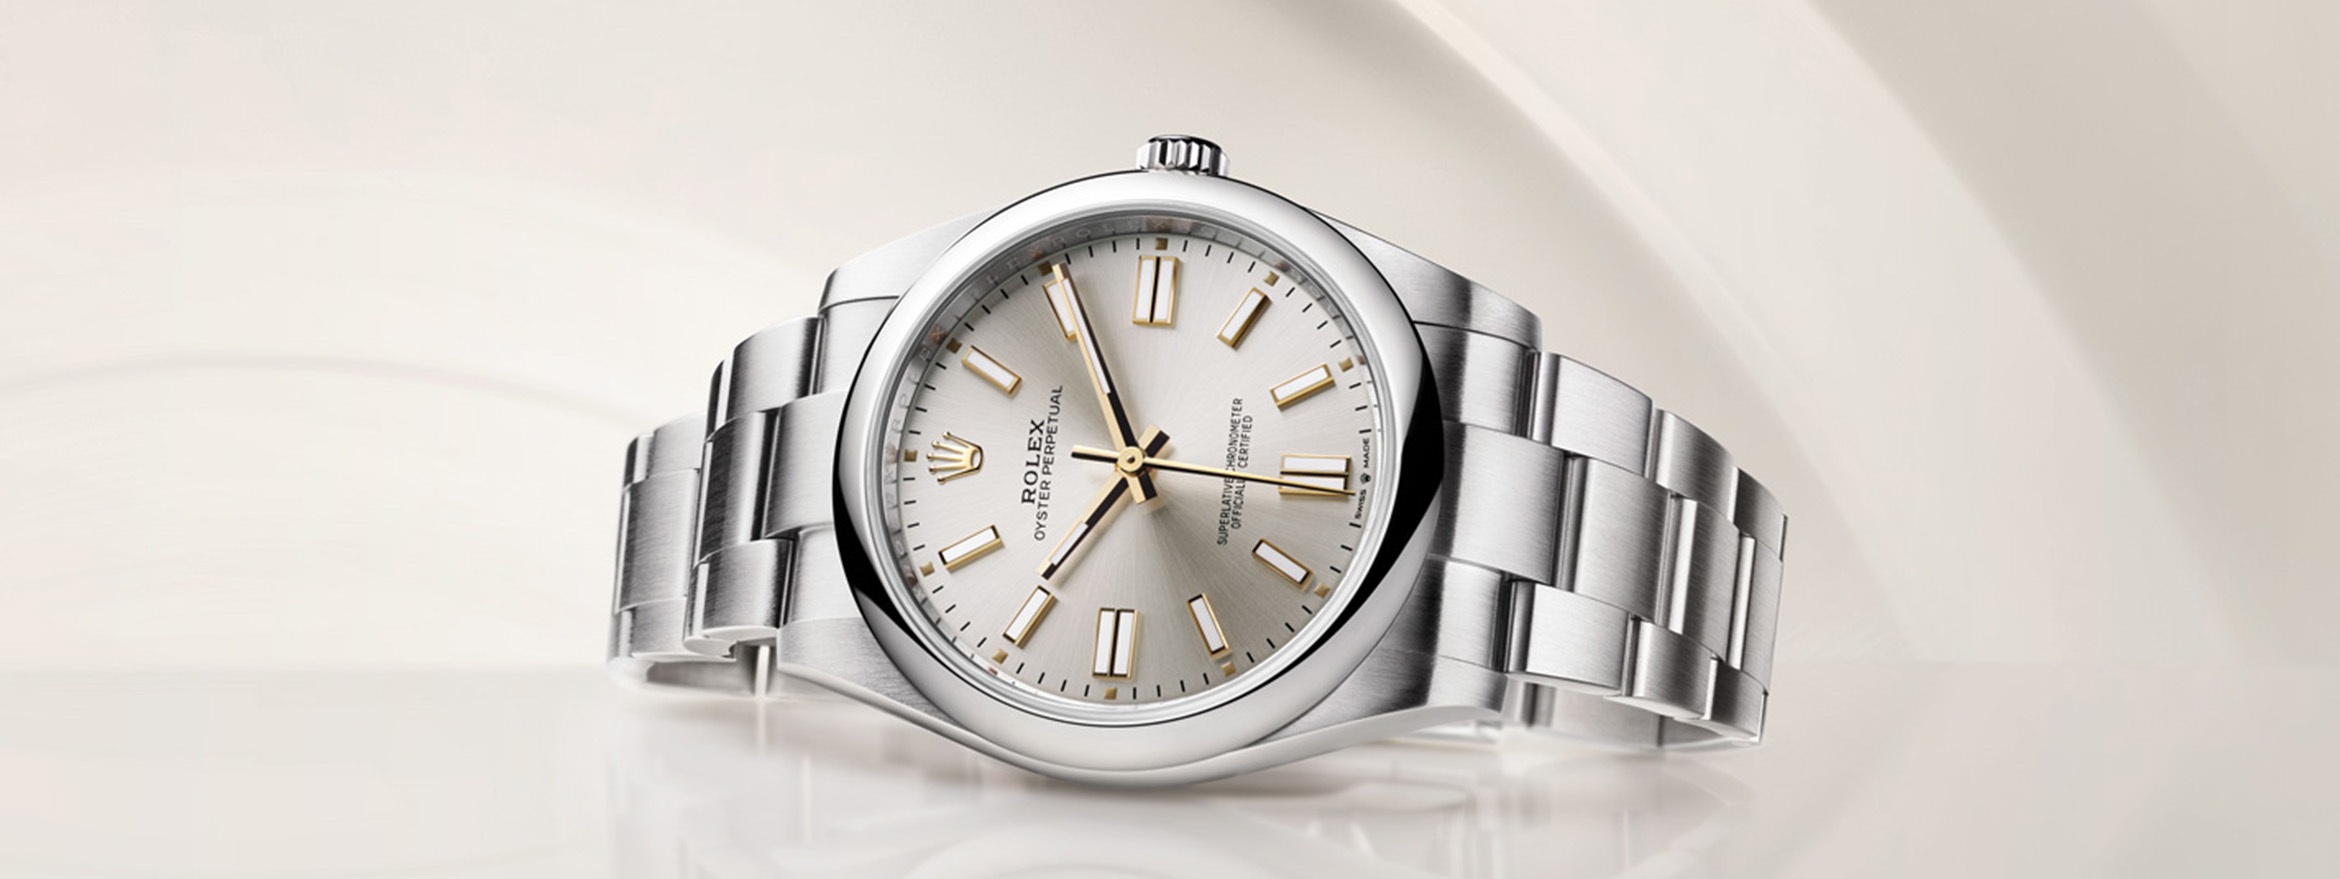 Rolex, The Essence the Oyster | Hour Glass